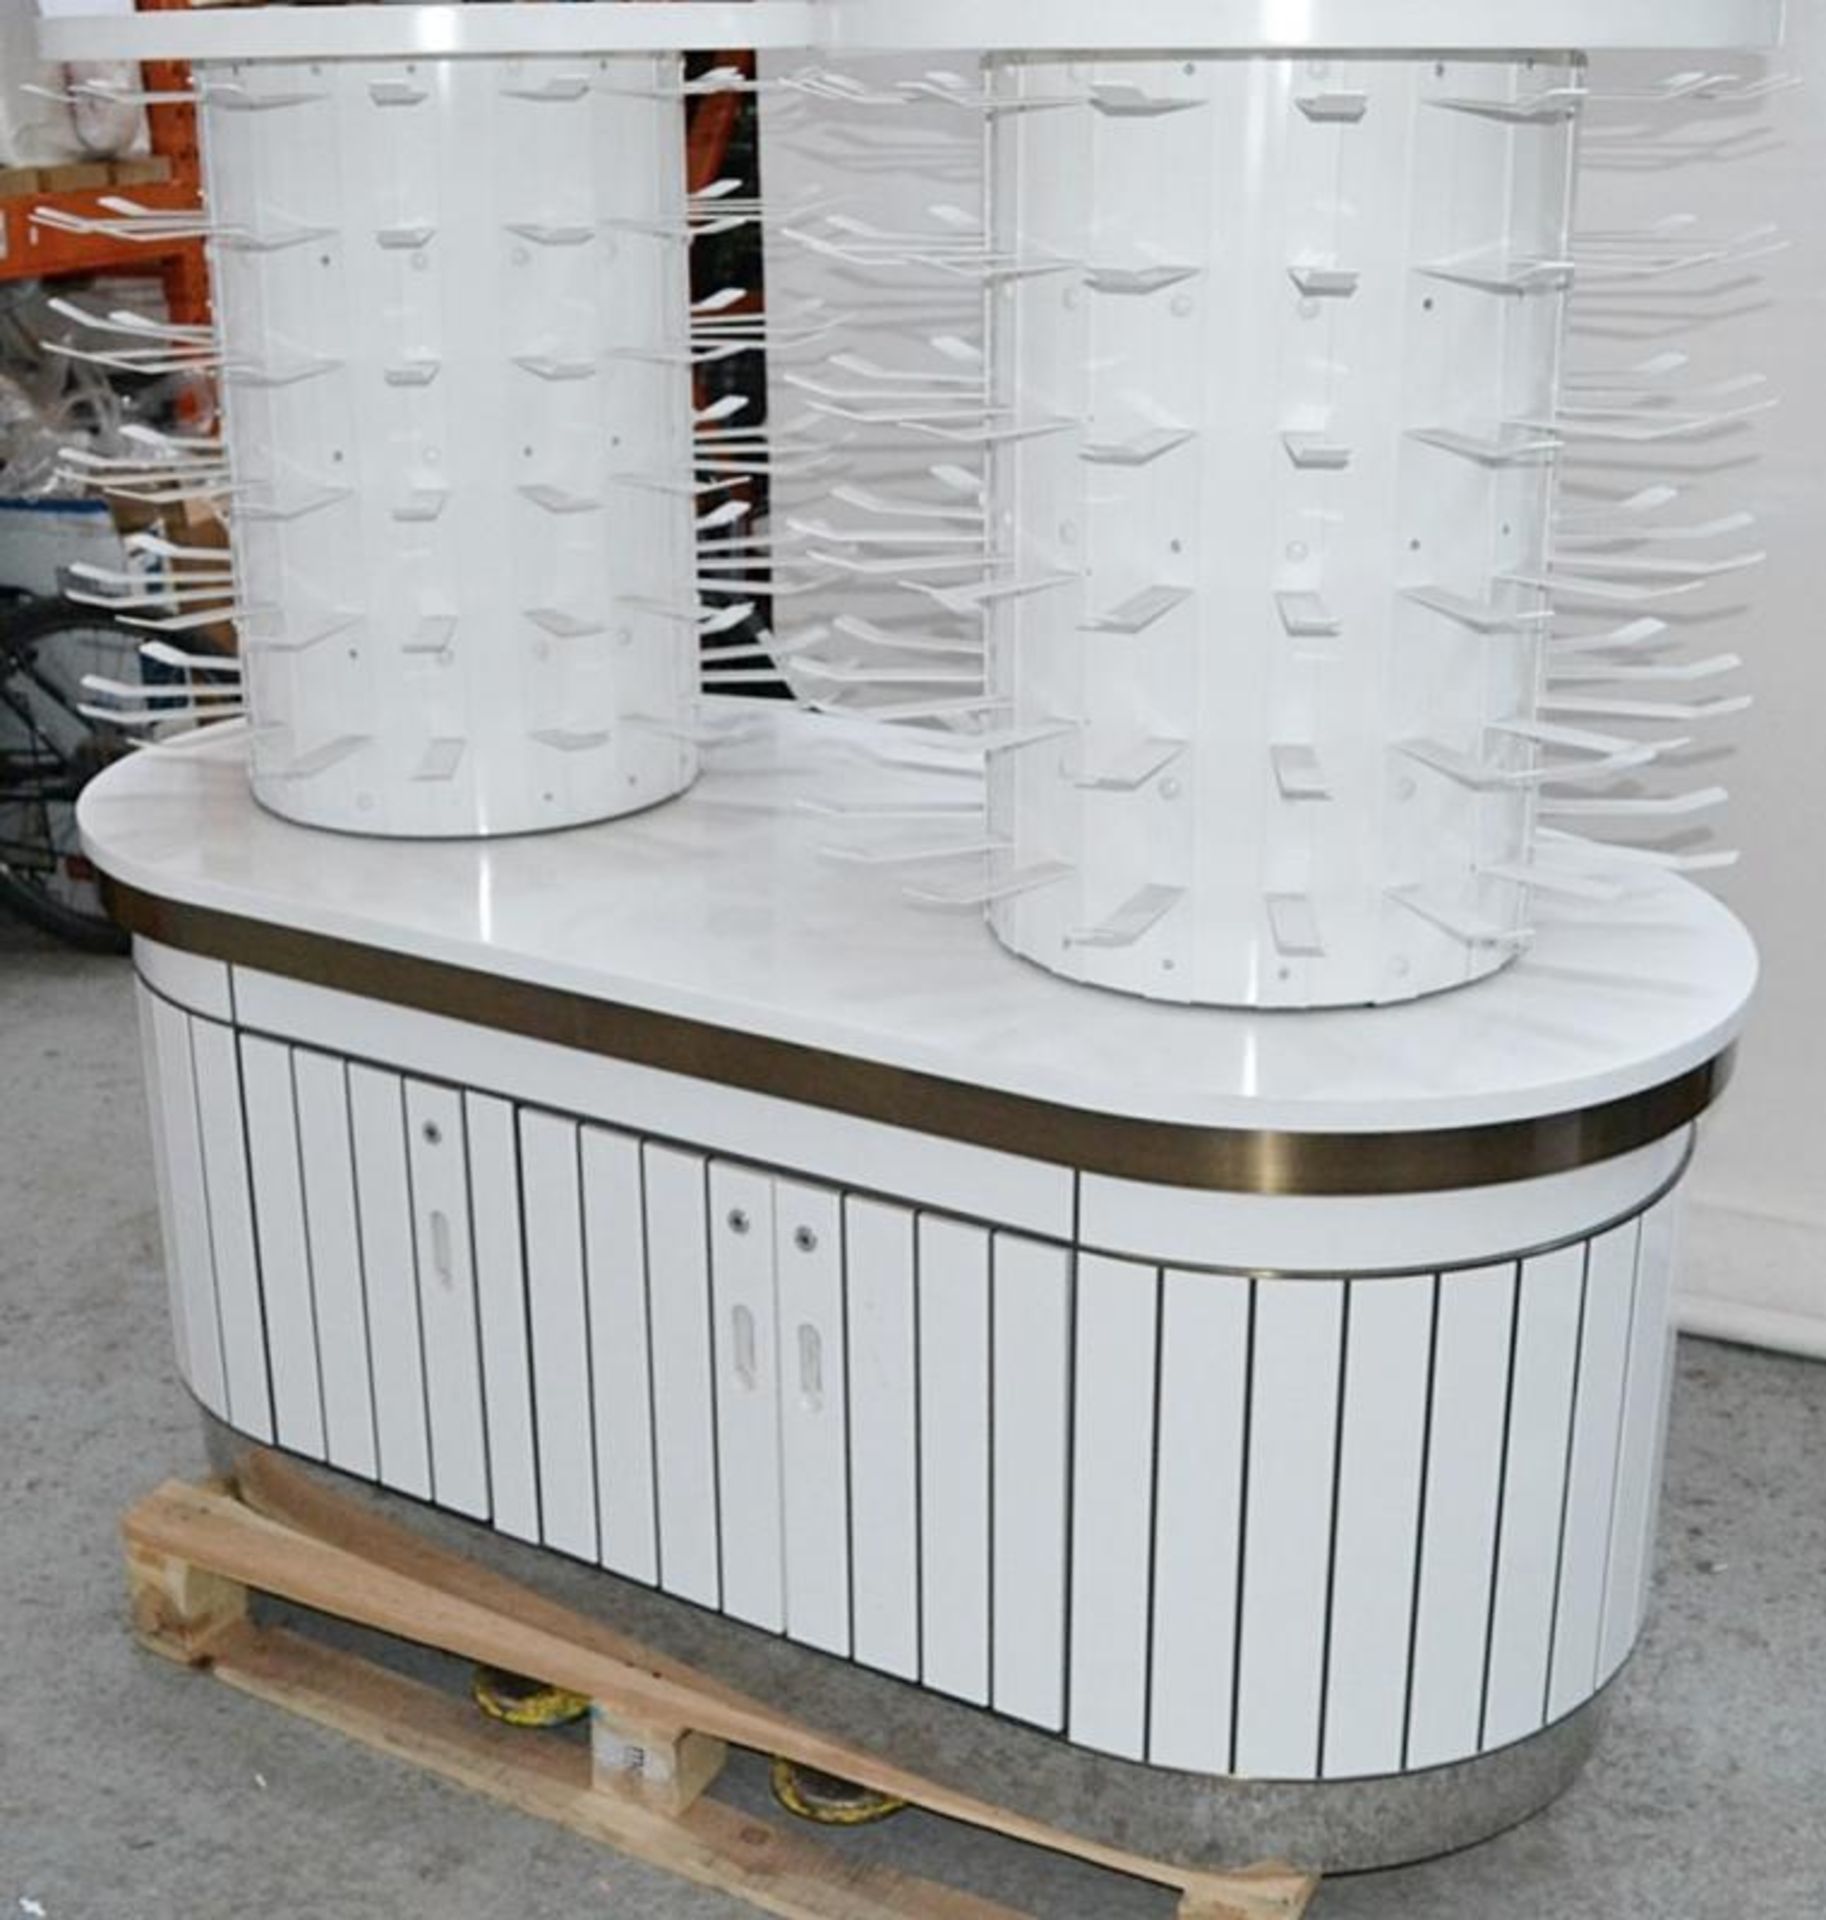 2 x Curved Cosmetics Shop Counters With Revolving Carousels In White - Recently Removed From Harrods - Image 2 of 8